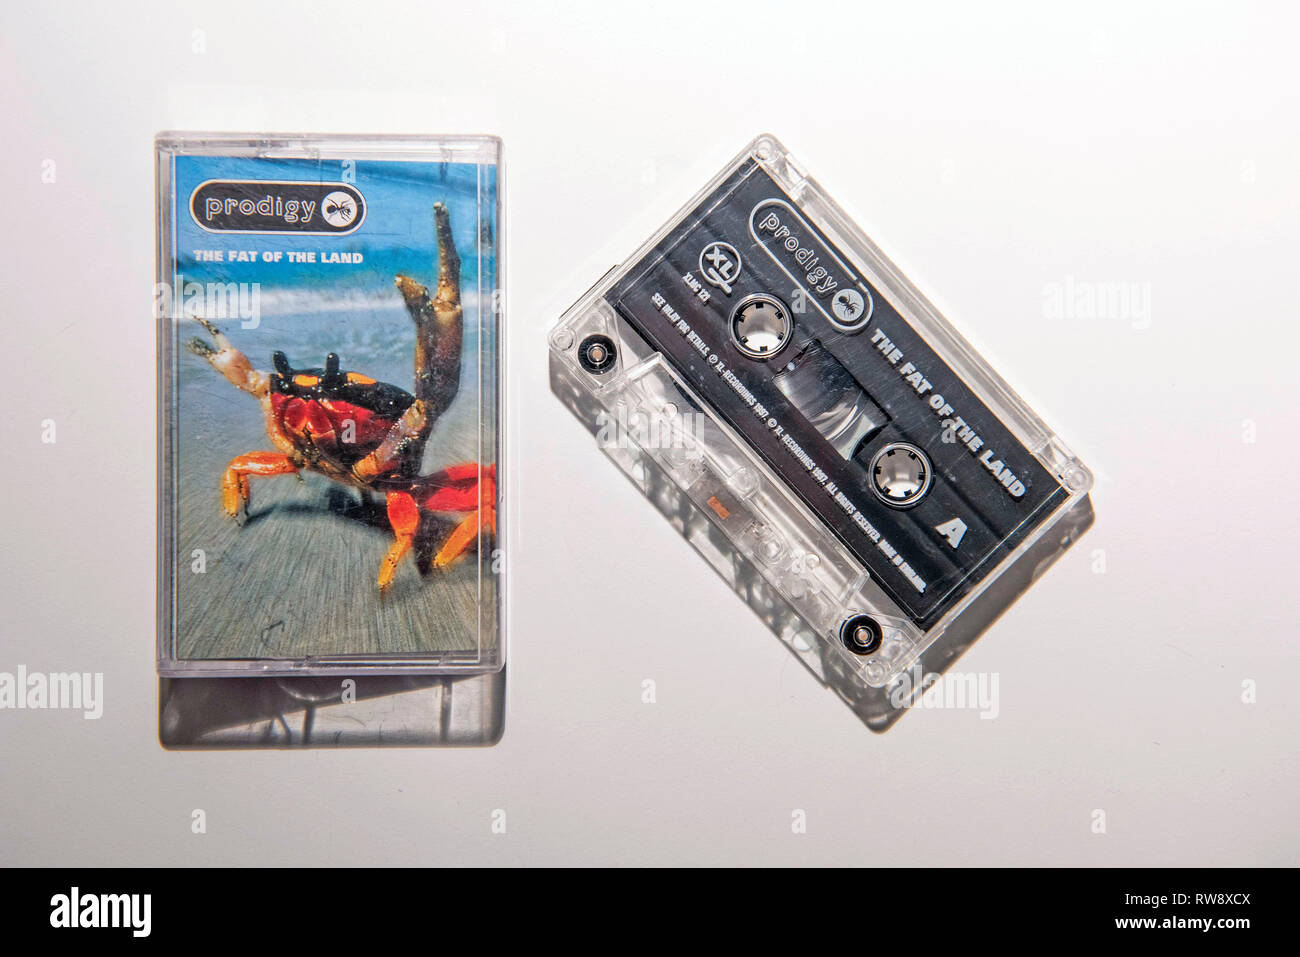 Original cassette album - The Fat of the Land (1997) by The Prodigy Stock  Photo - Alamy